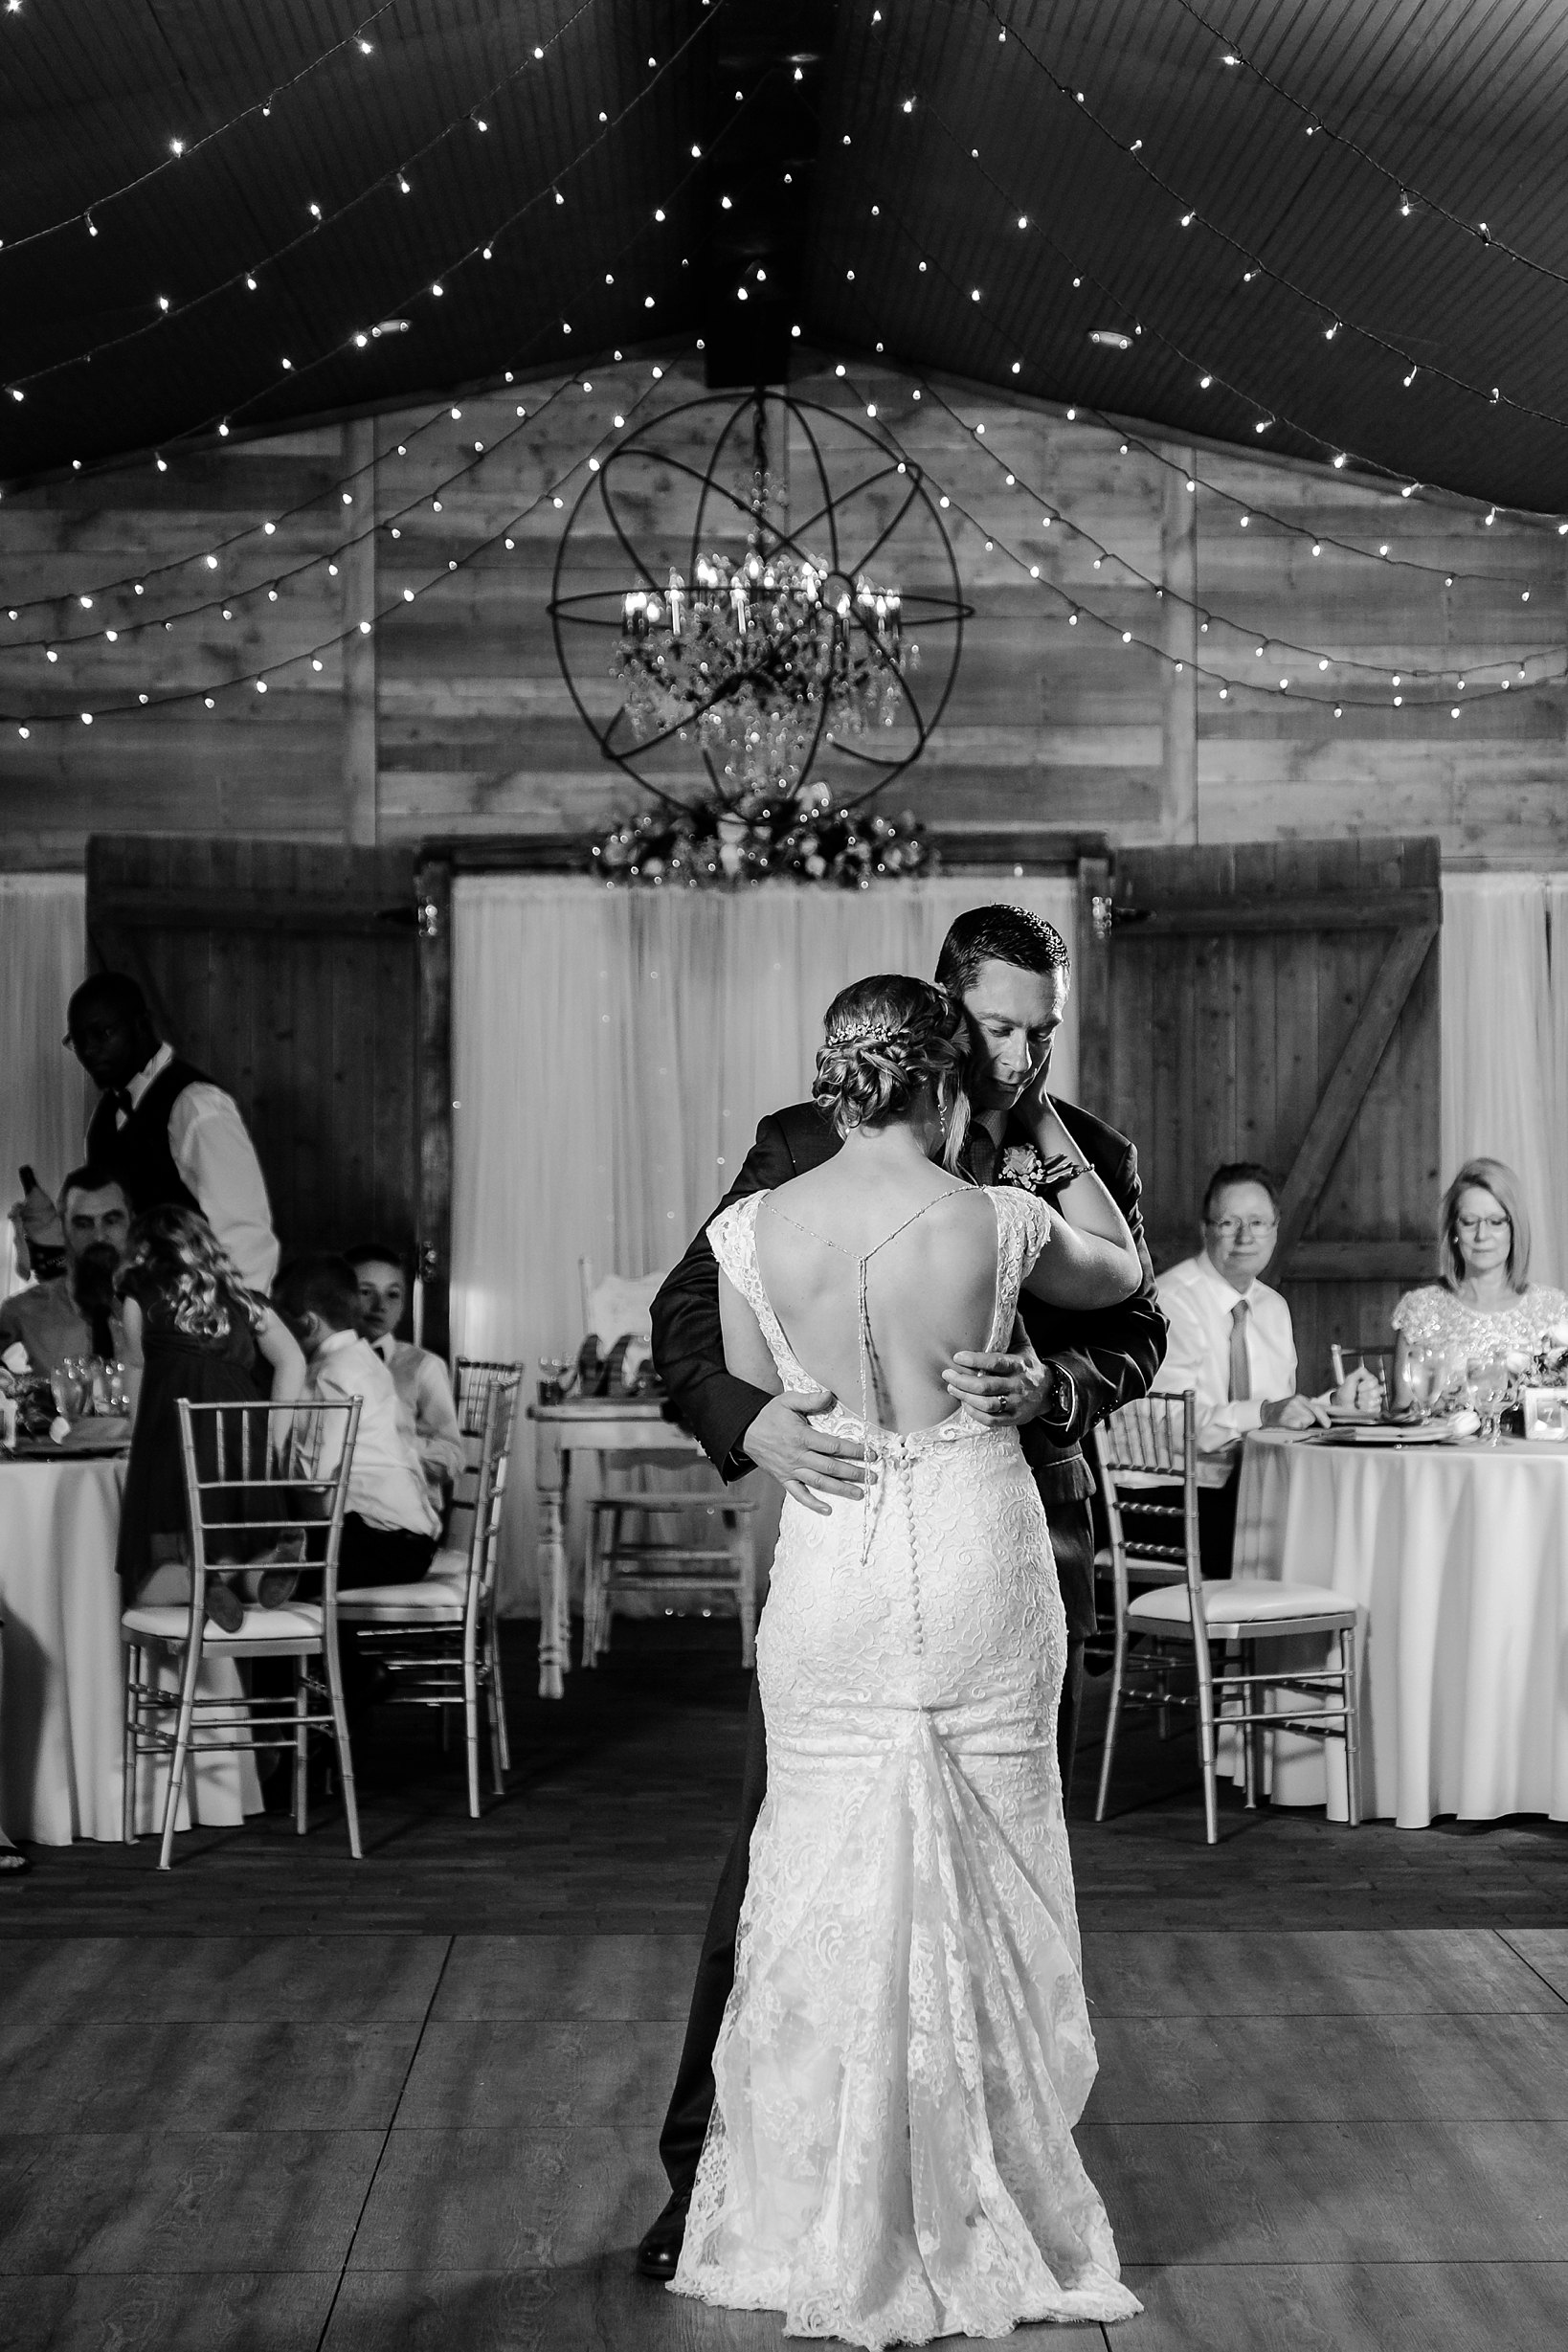 Classic black and white image of a bride and groom dancing during their wedding reception